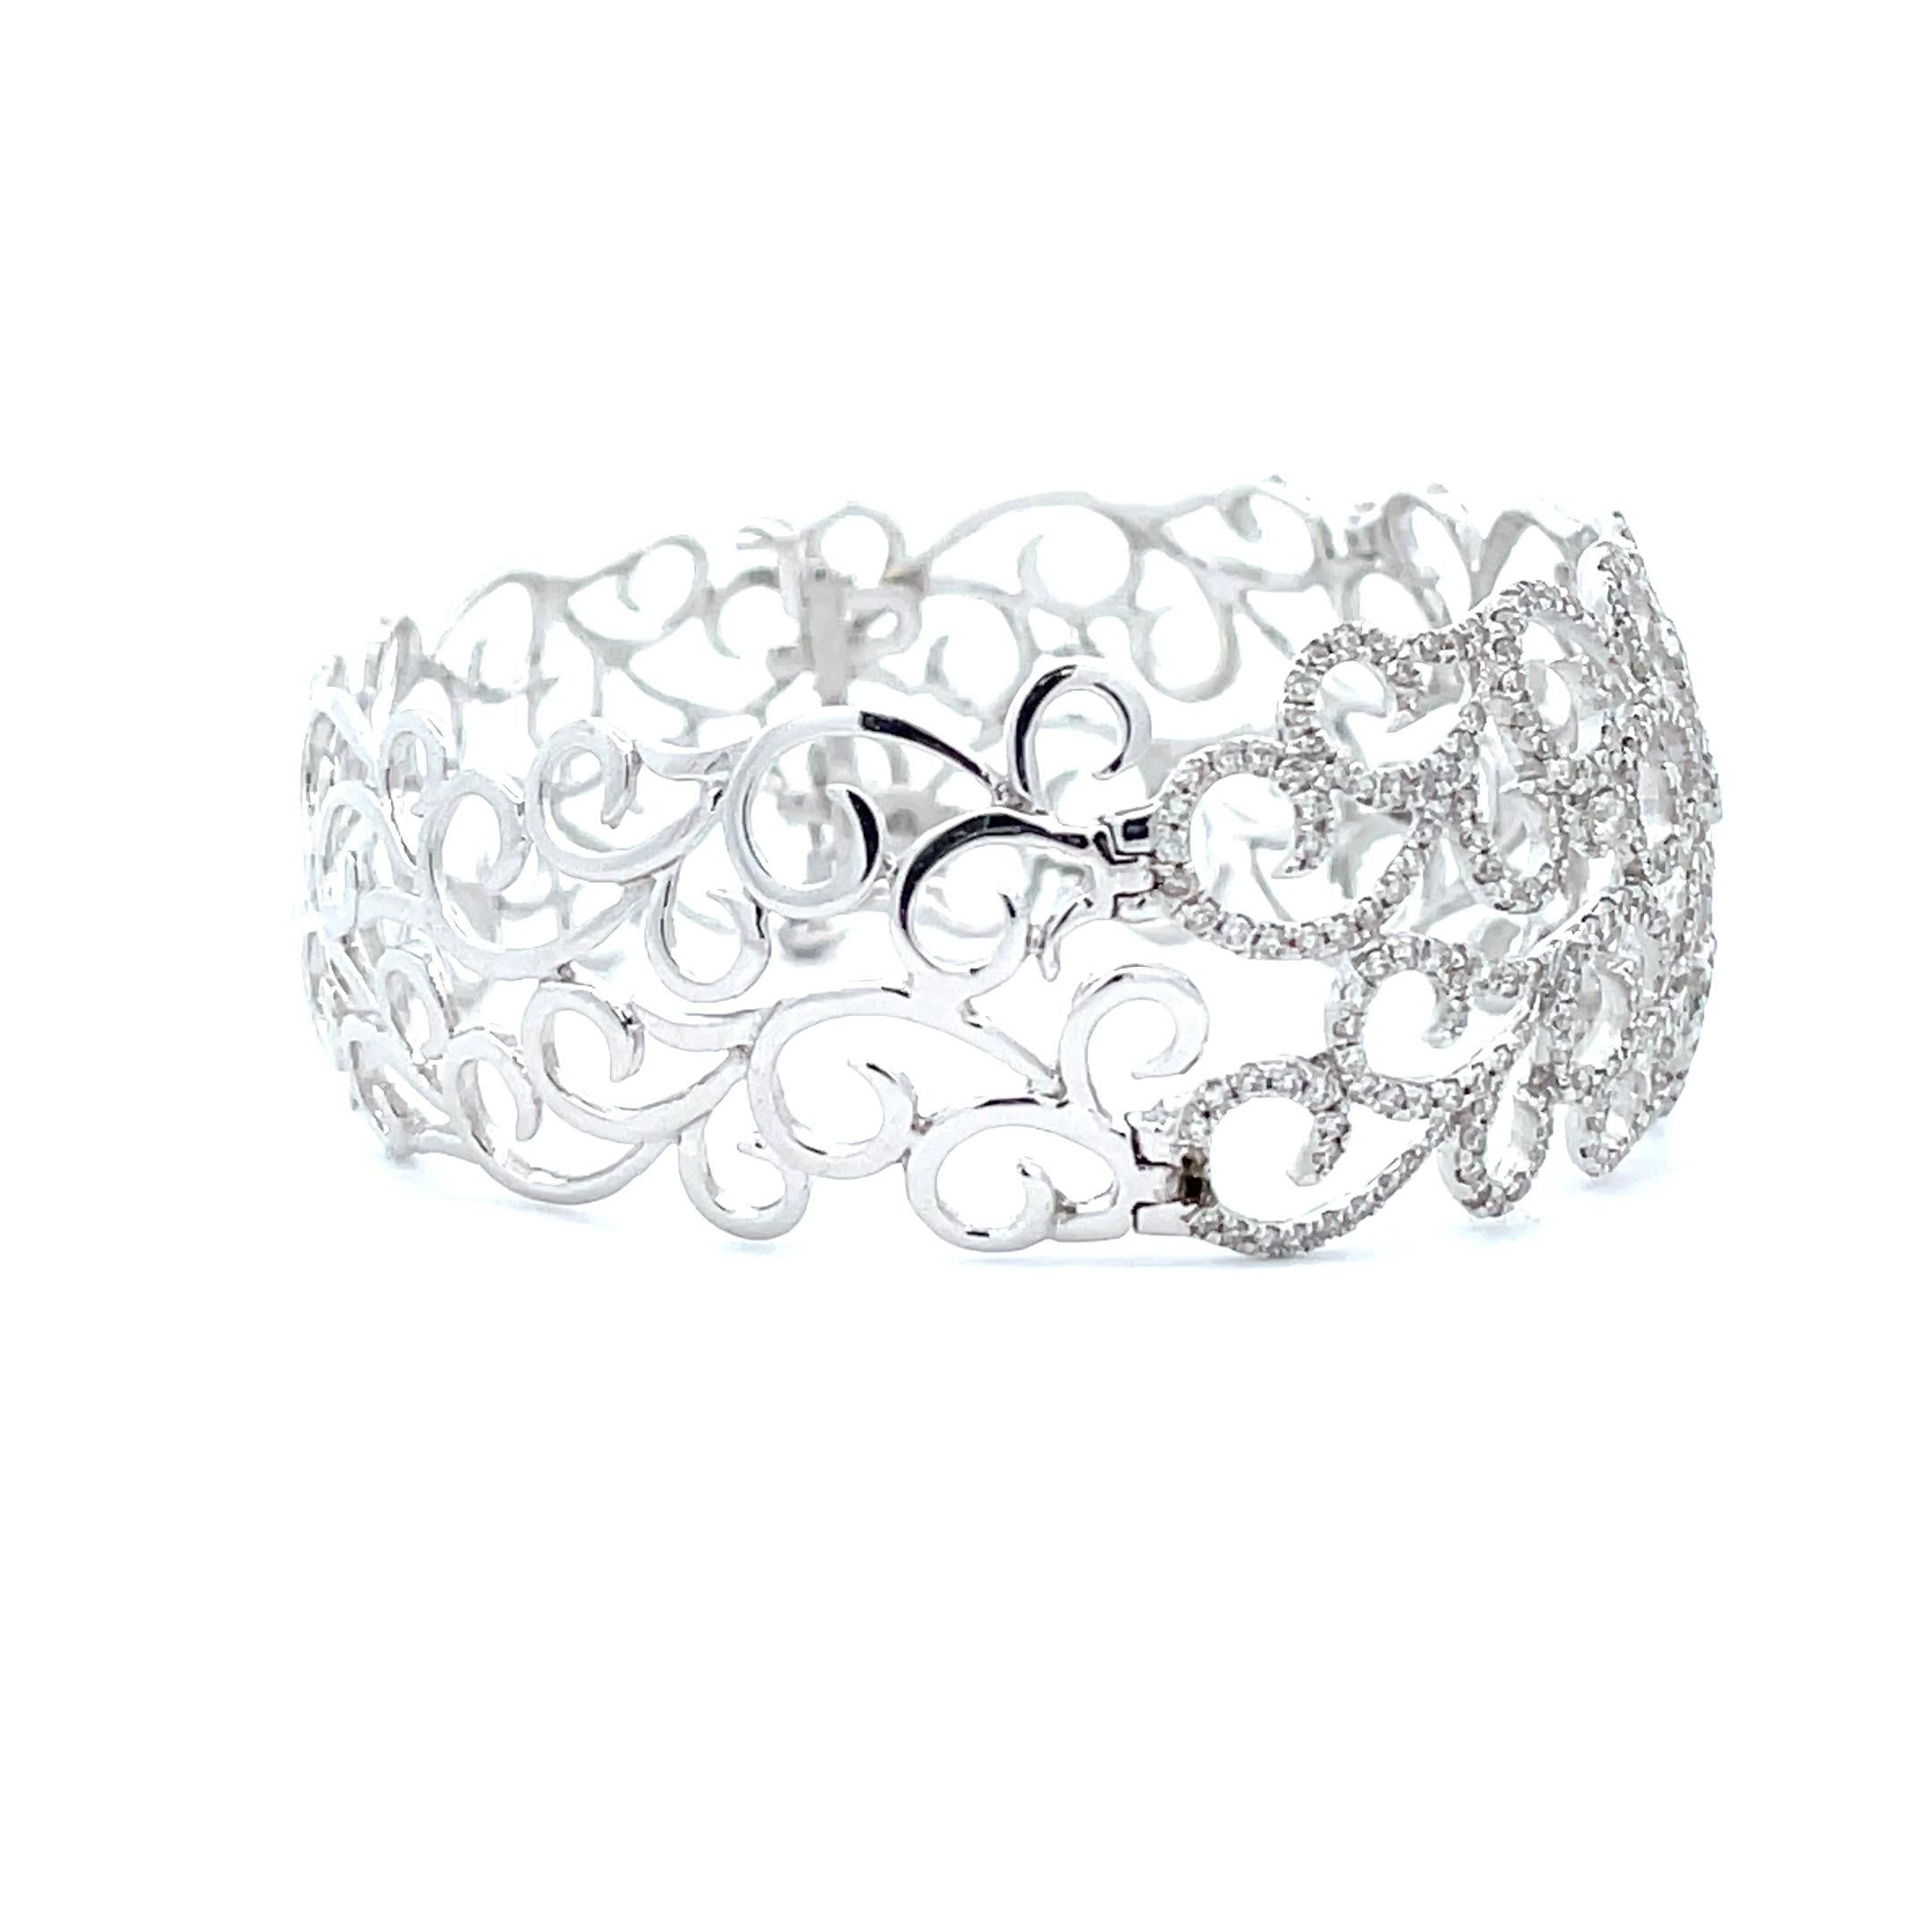 This 3.04 ct. Vintage Inspired Diamond Vine Hollow Bangle is a perfect gift for the lady in your life. With a pear shaped stone and intricate details, this bangle will be treasured for generations to come. The delicate vine motif design of this